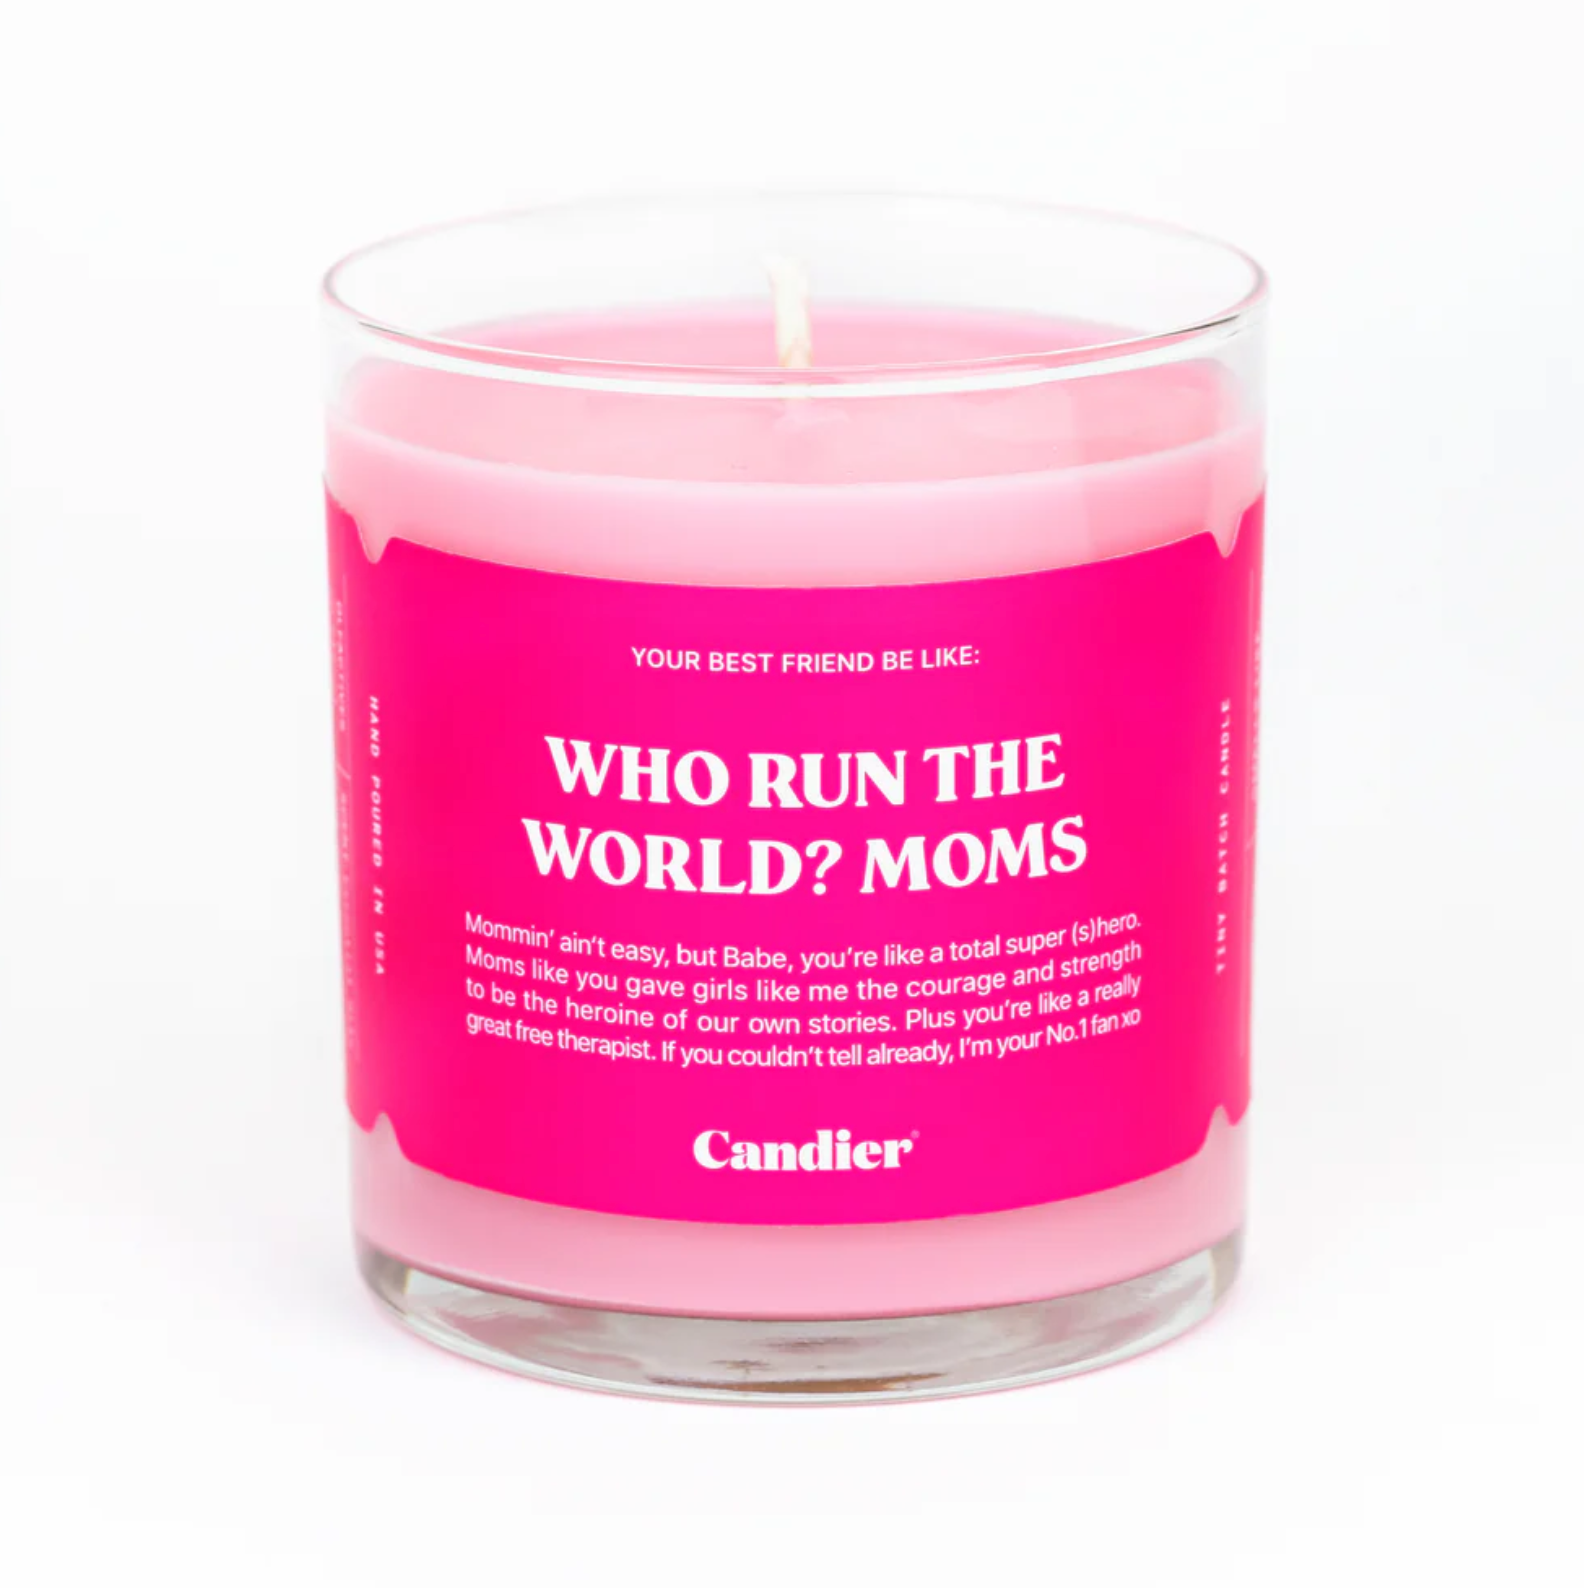 WHO RUN THE WORLD? MOMS. CANDLE